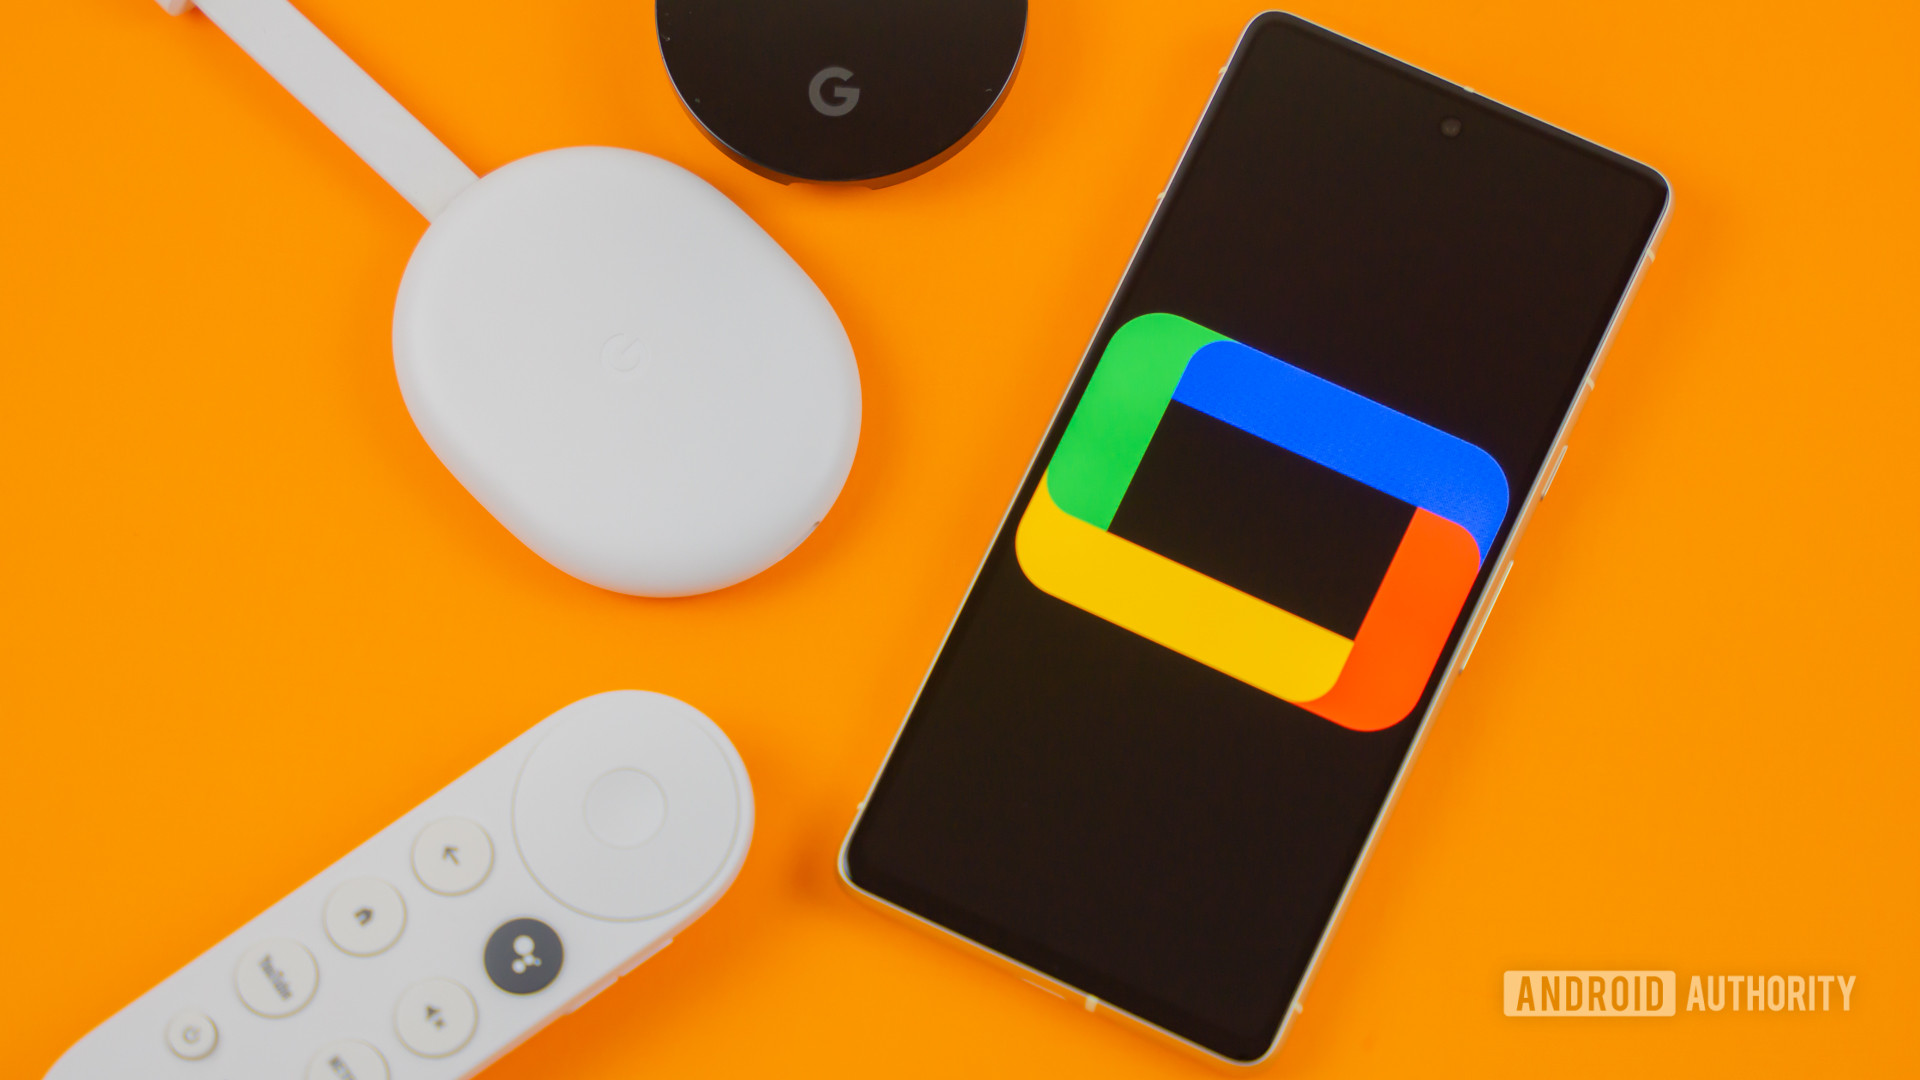 Google TV logo on smartphone next to Chromecast devices and remote Stock photo 3